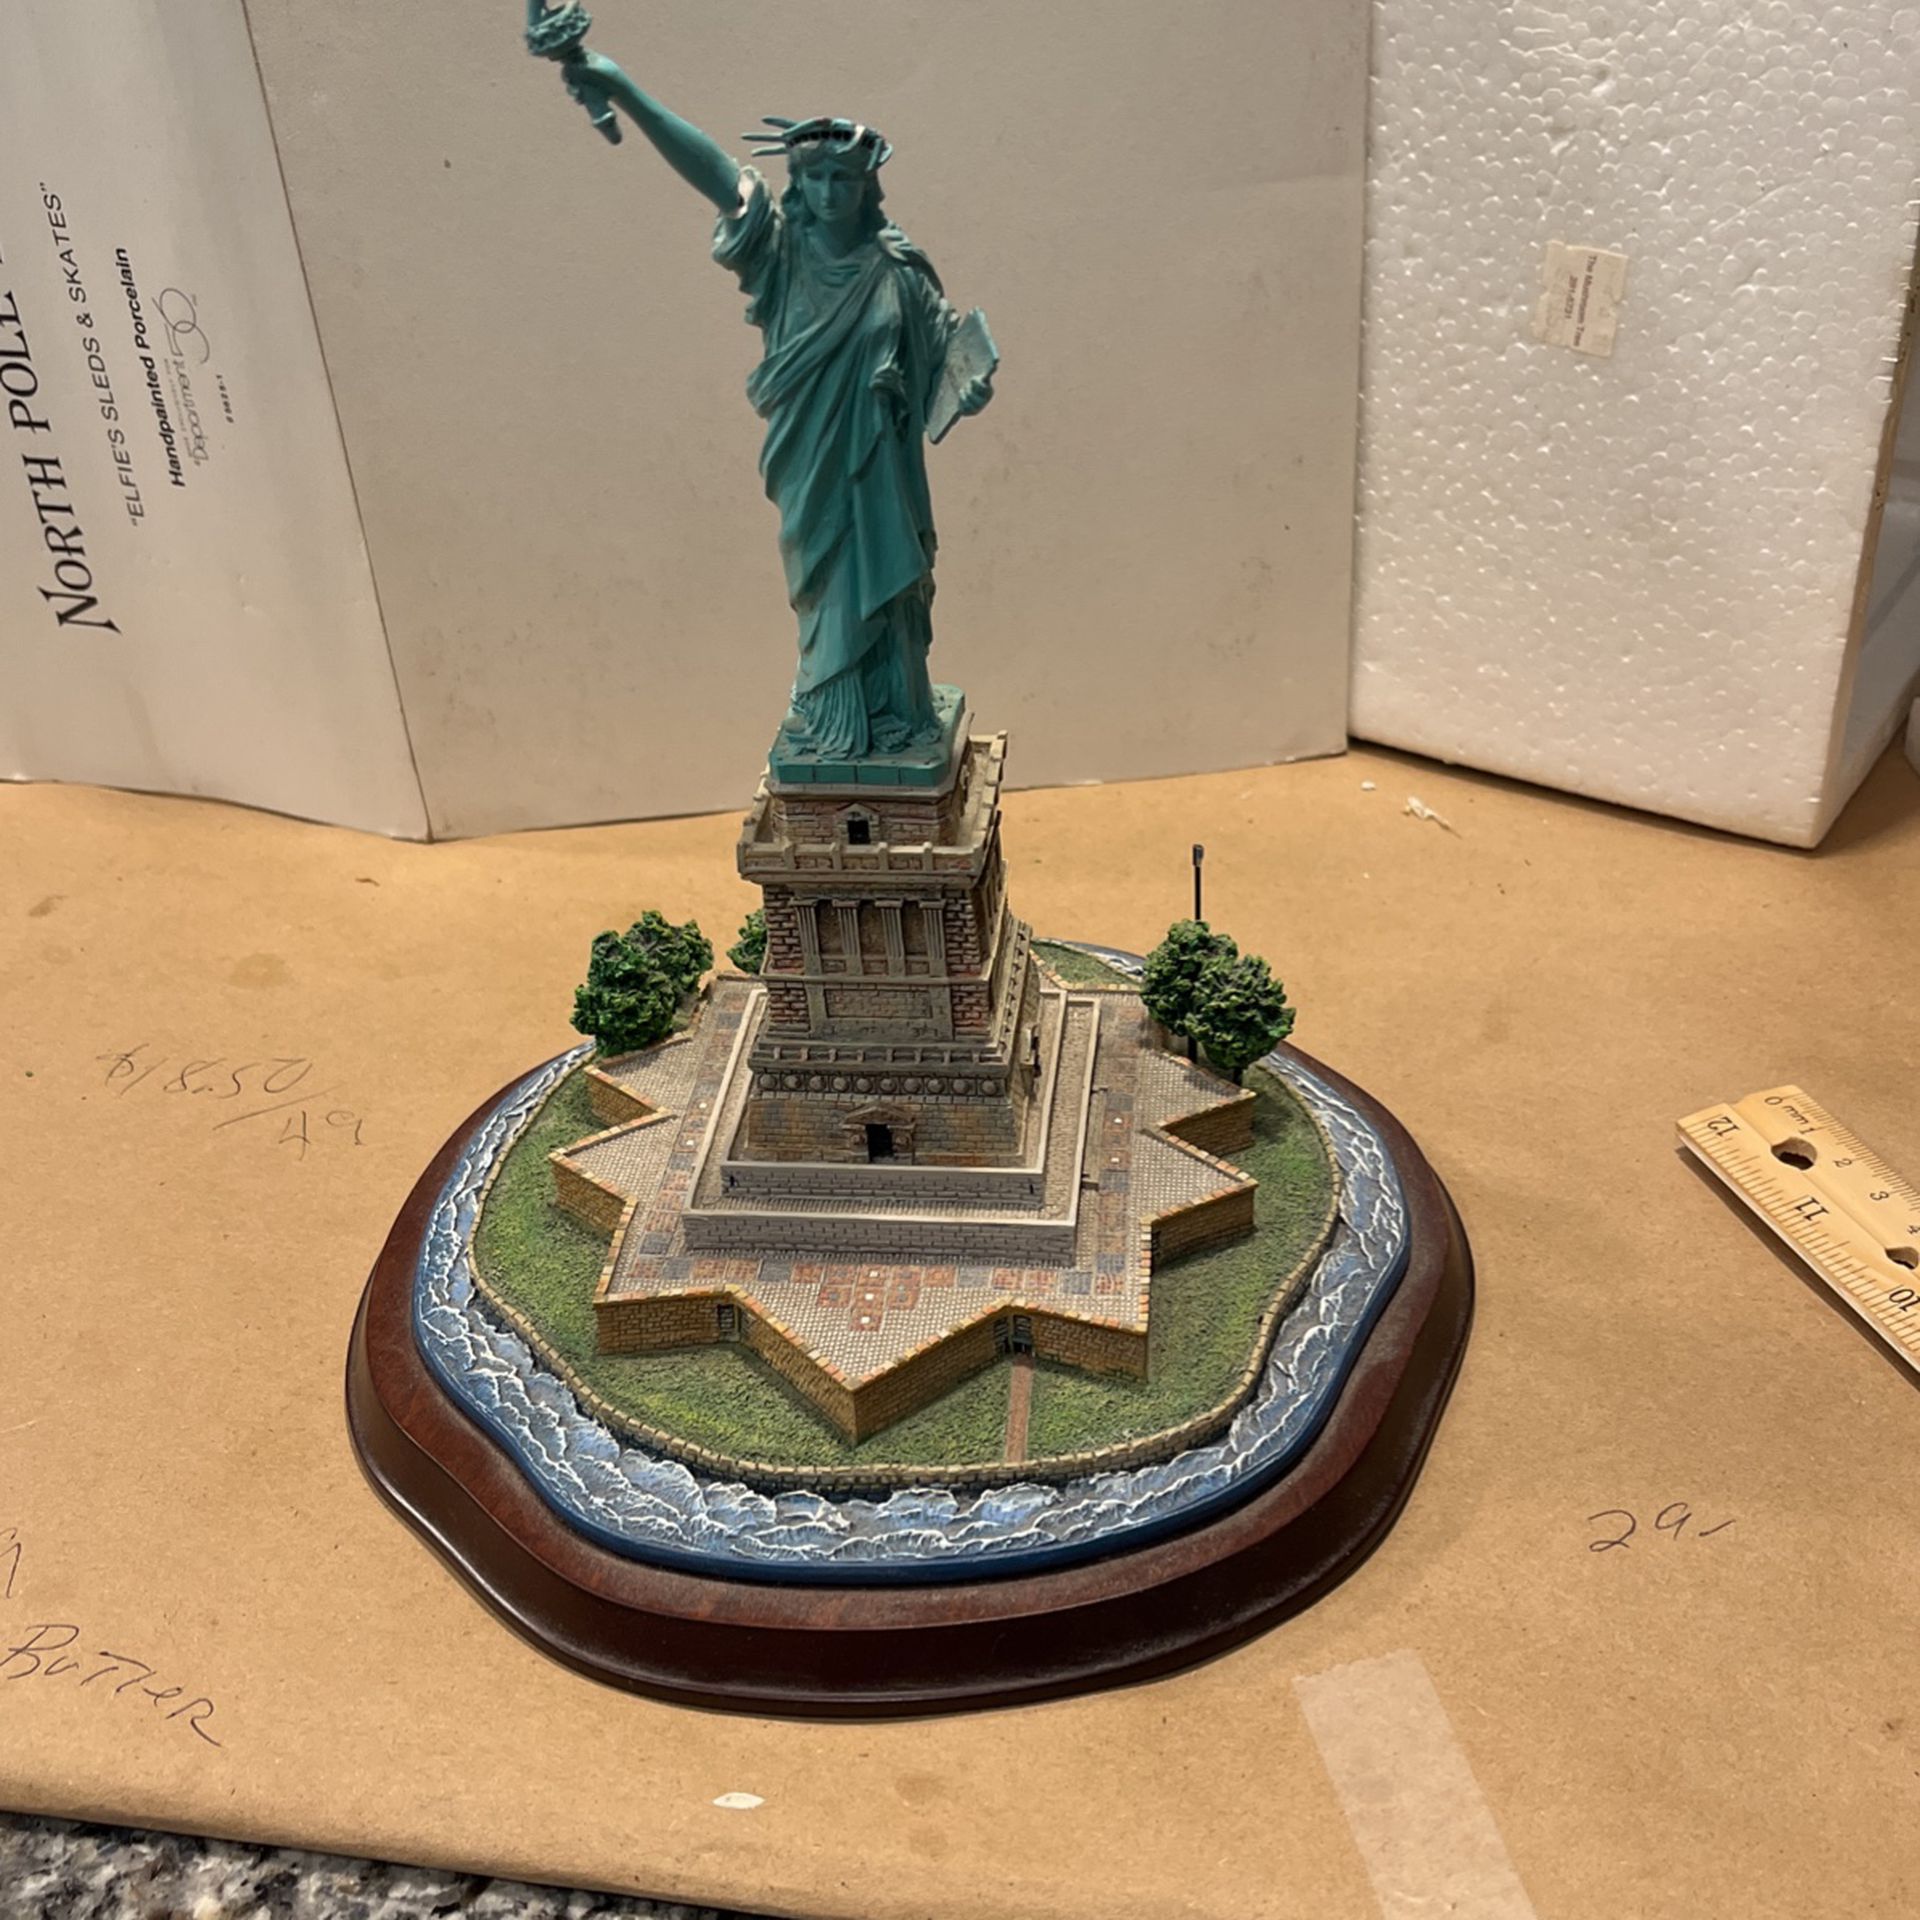 The Statue of Liberty by Danbury mint